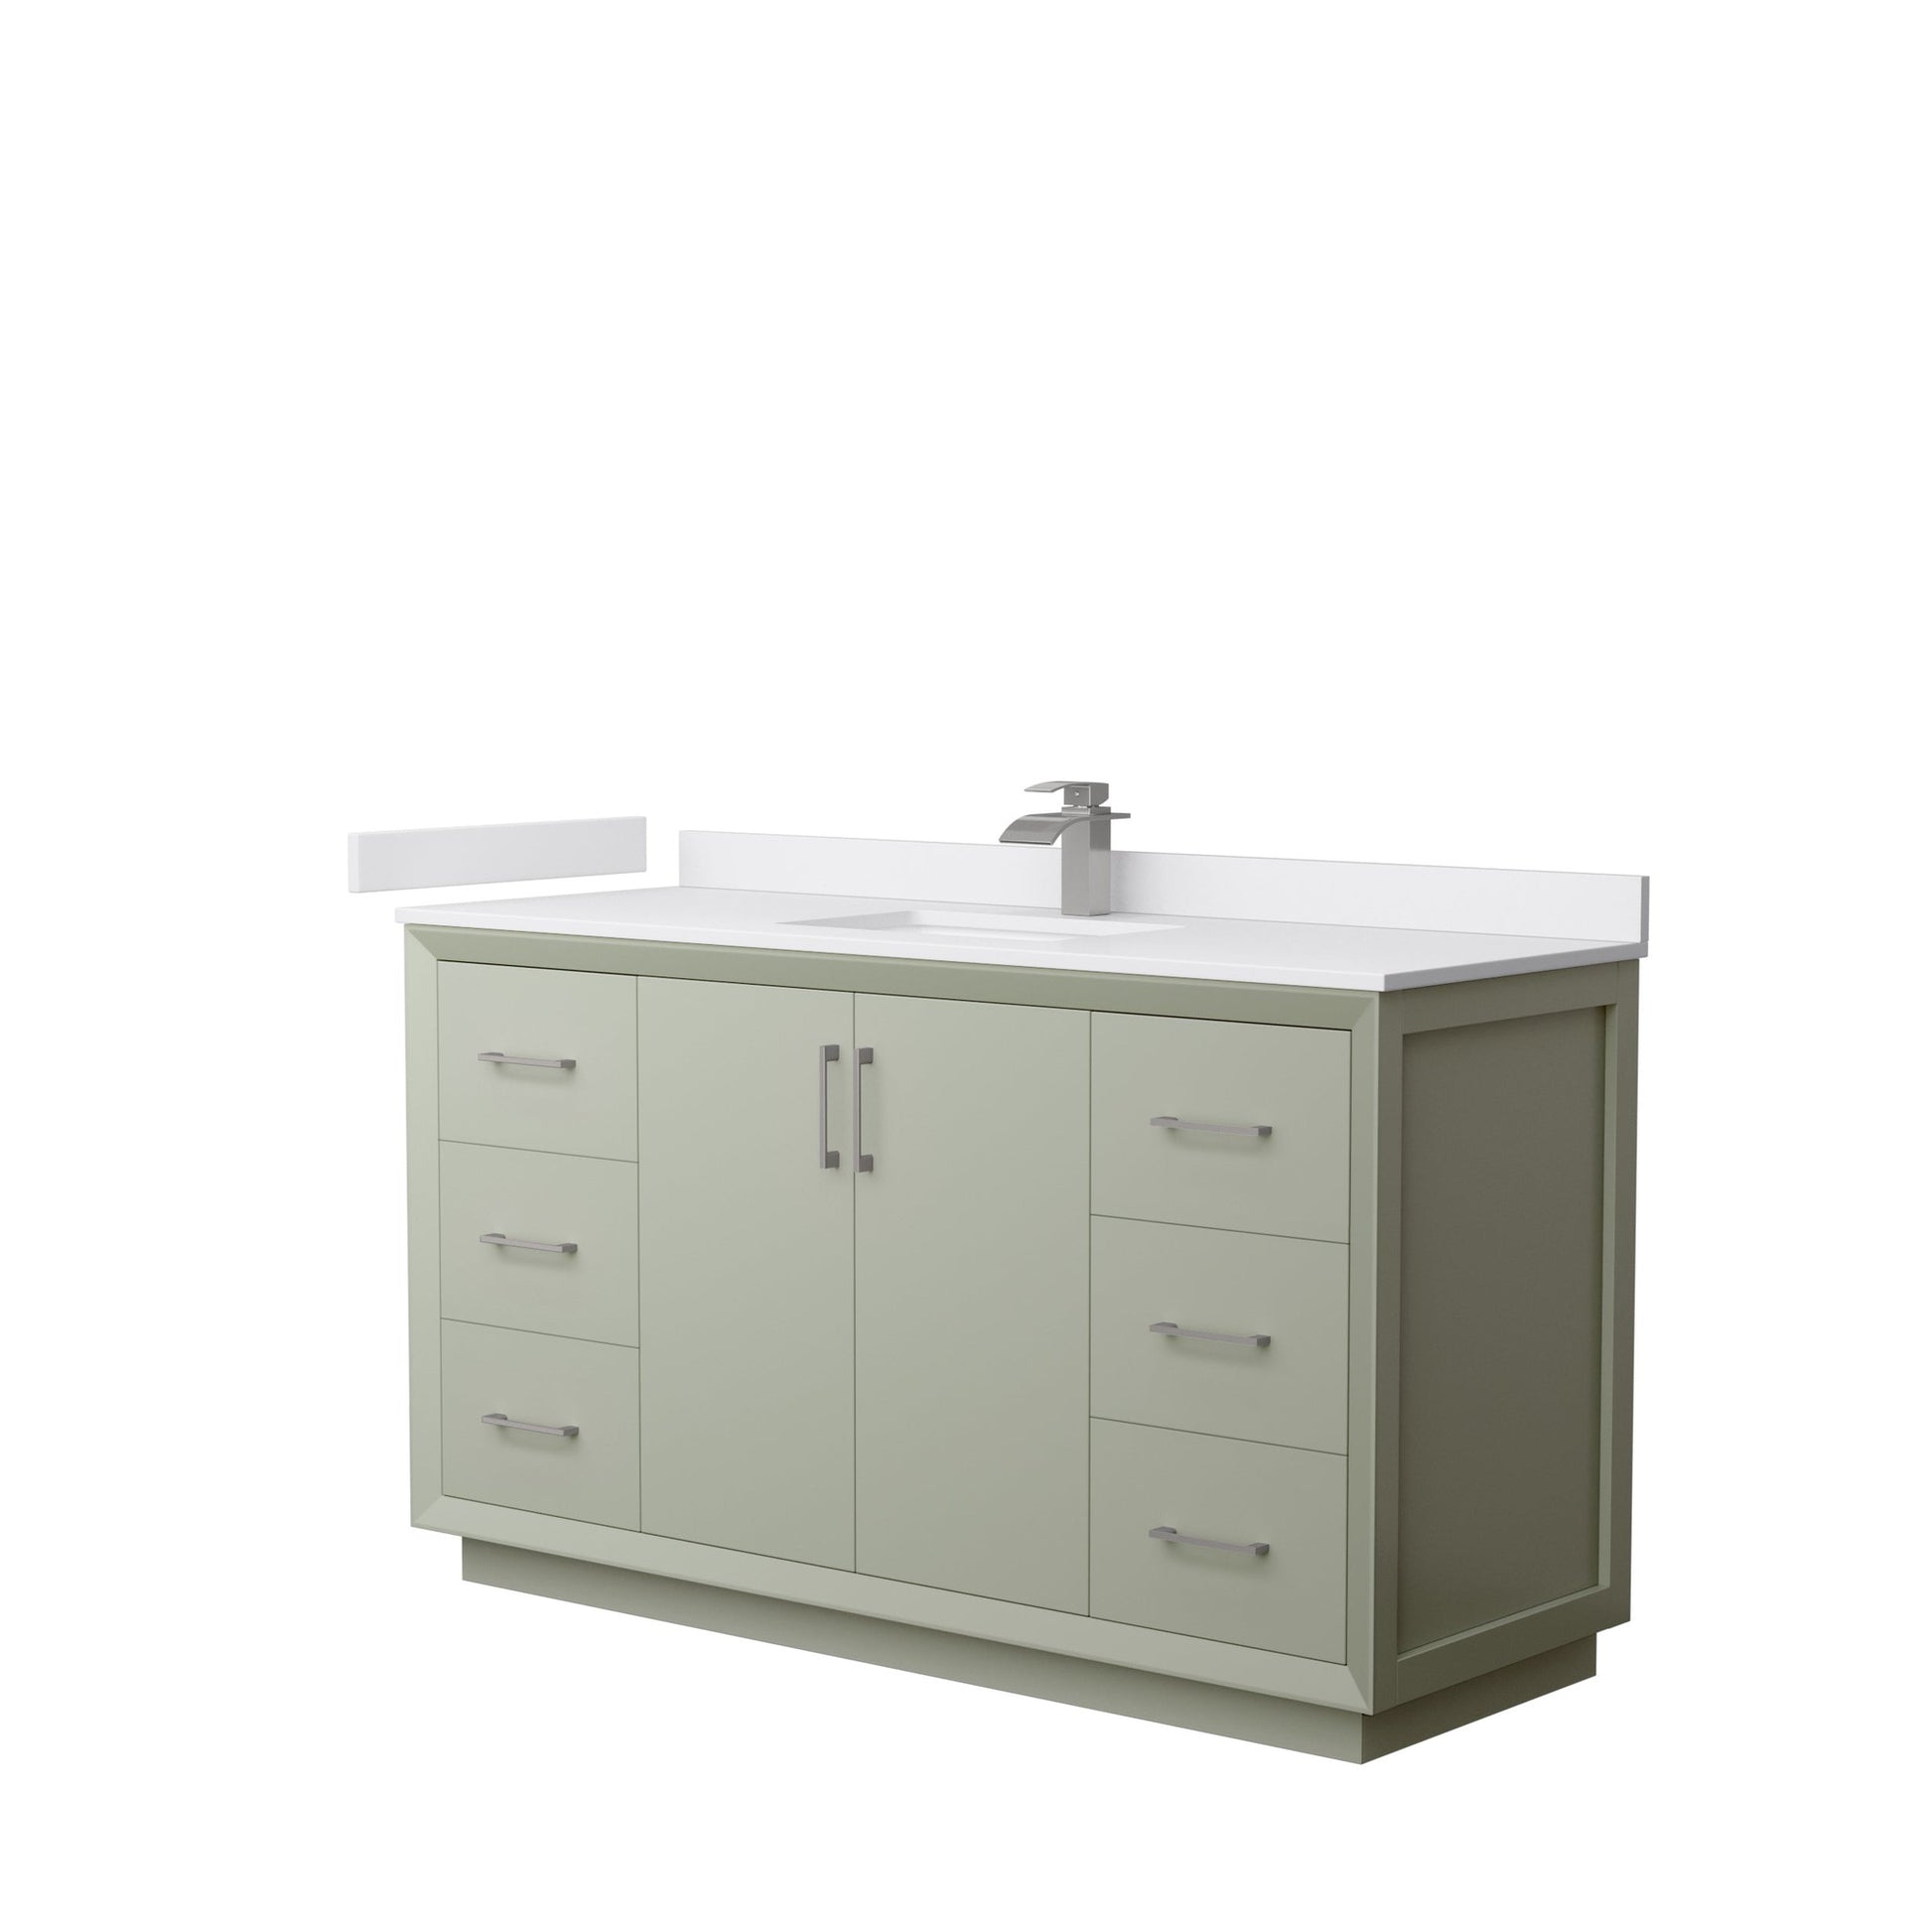 Wyndham Collection Strada 60" Single Bathroom Vanity in Light Green, White Cultured Marble Countertop, Undermount Square Sink, Brushed Nickel Trim